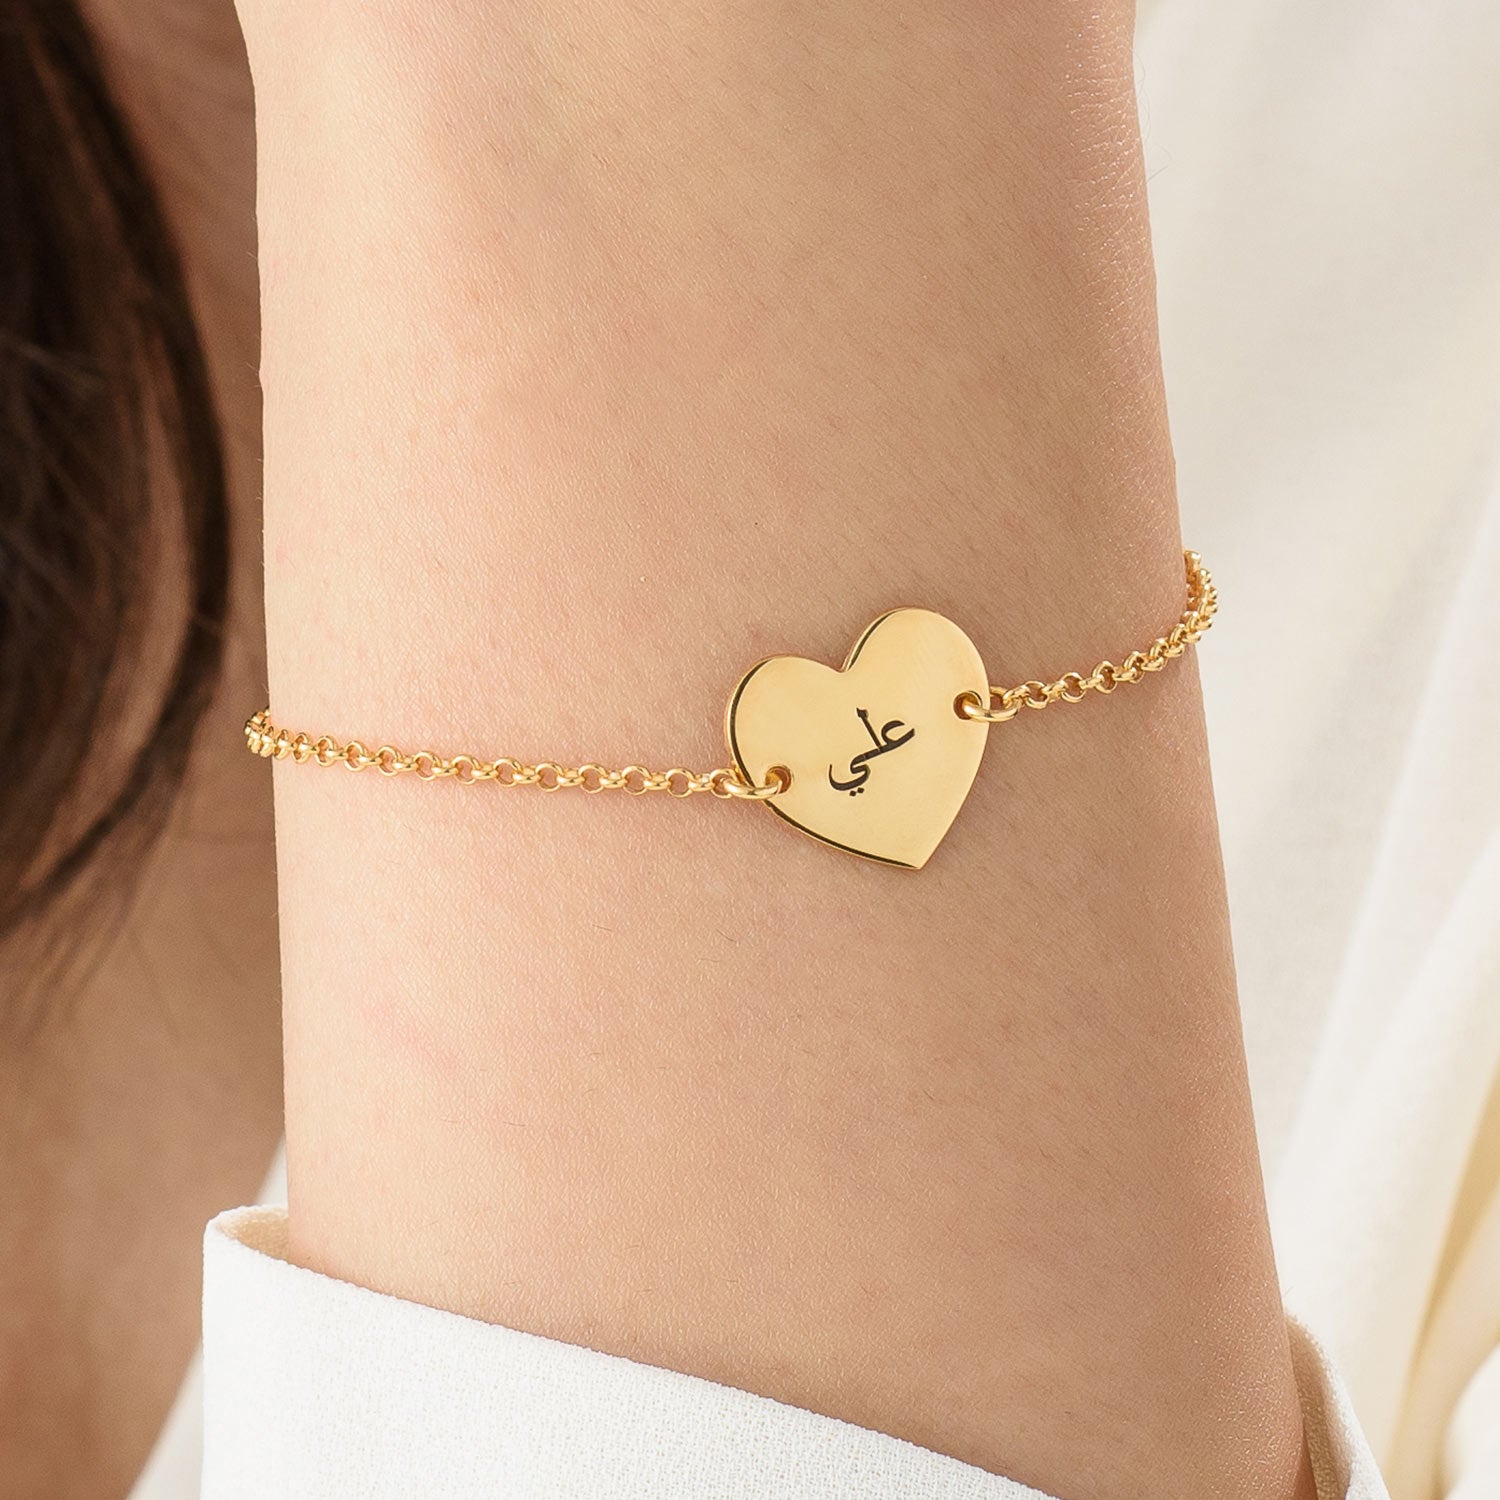 Couple's bracelet with engraved love heart in 18k gold plating